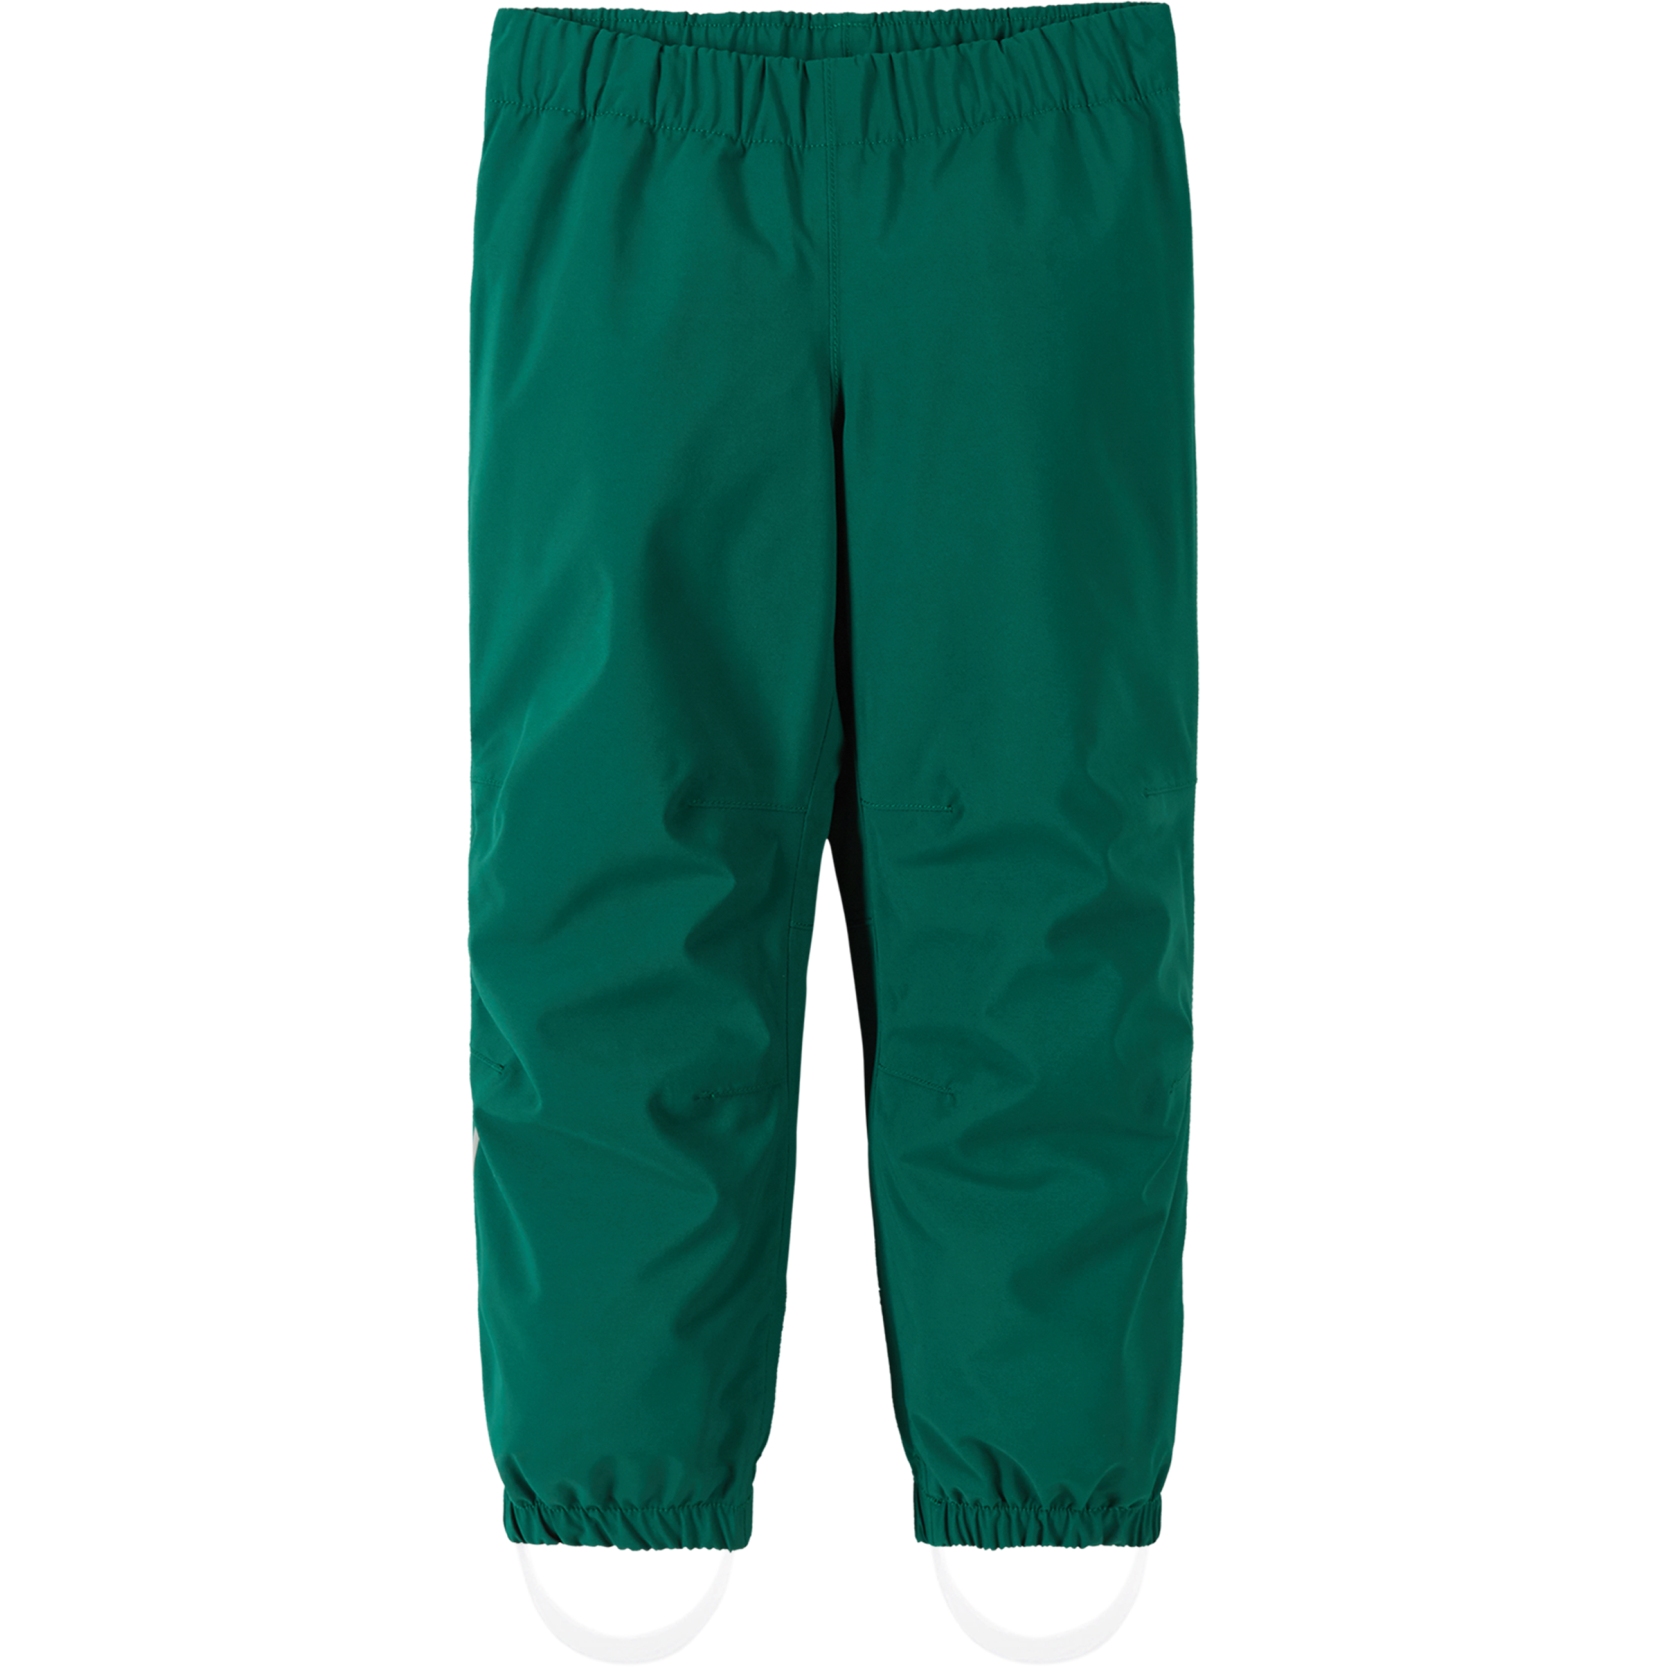 Picture of Reima Kaura Pants Toddler - deeper green 89A0